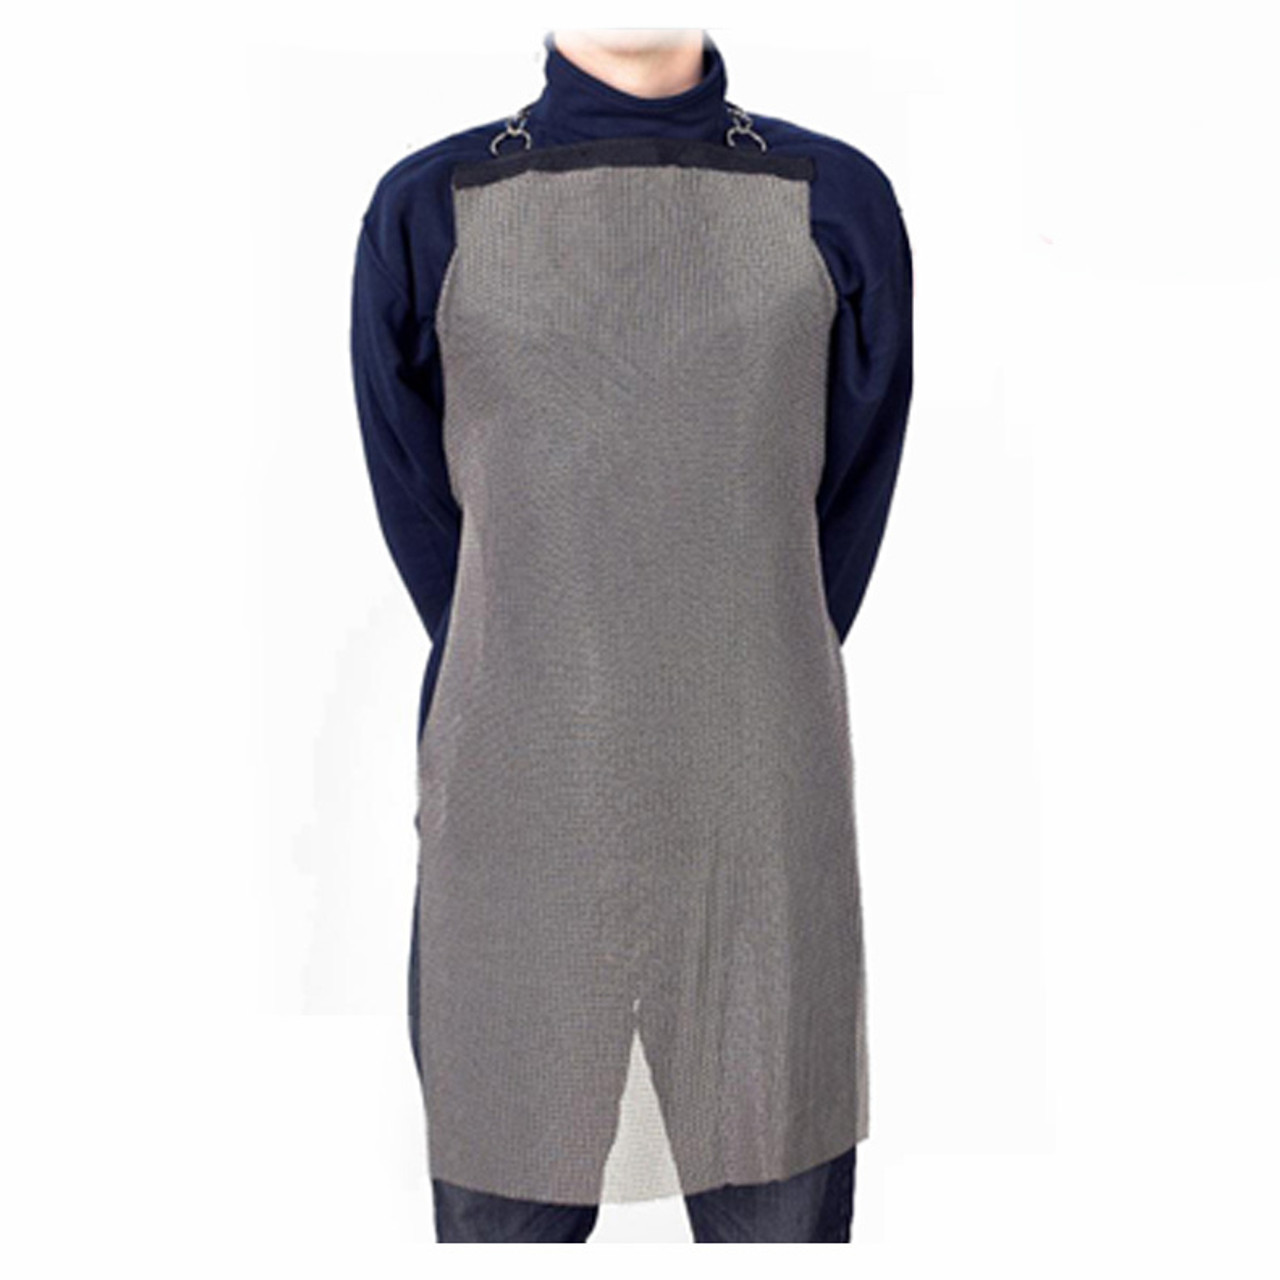 Stainless Steel Mesh Safety Aprons Usa